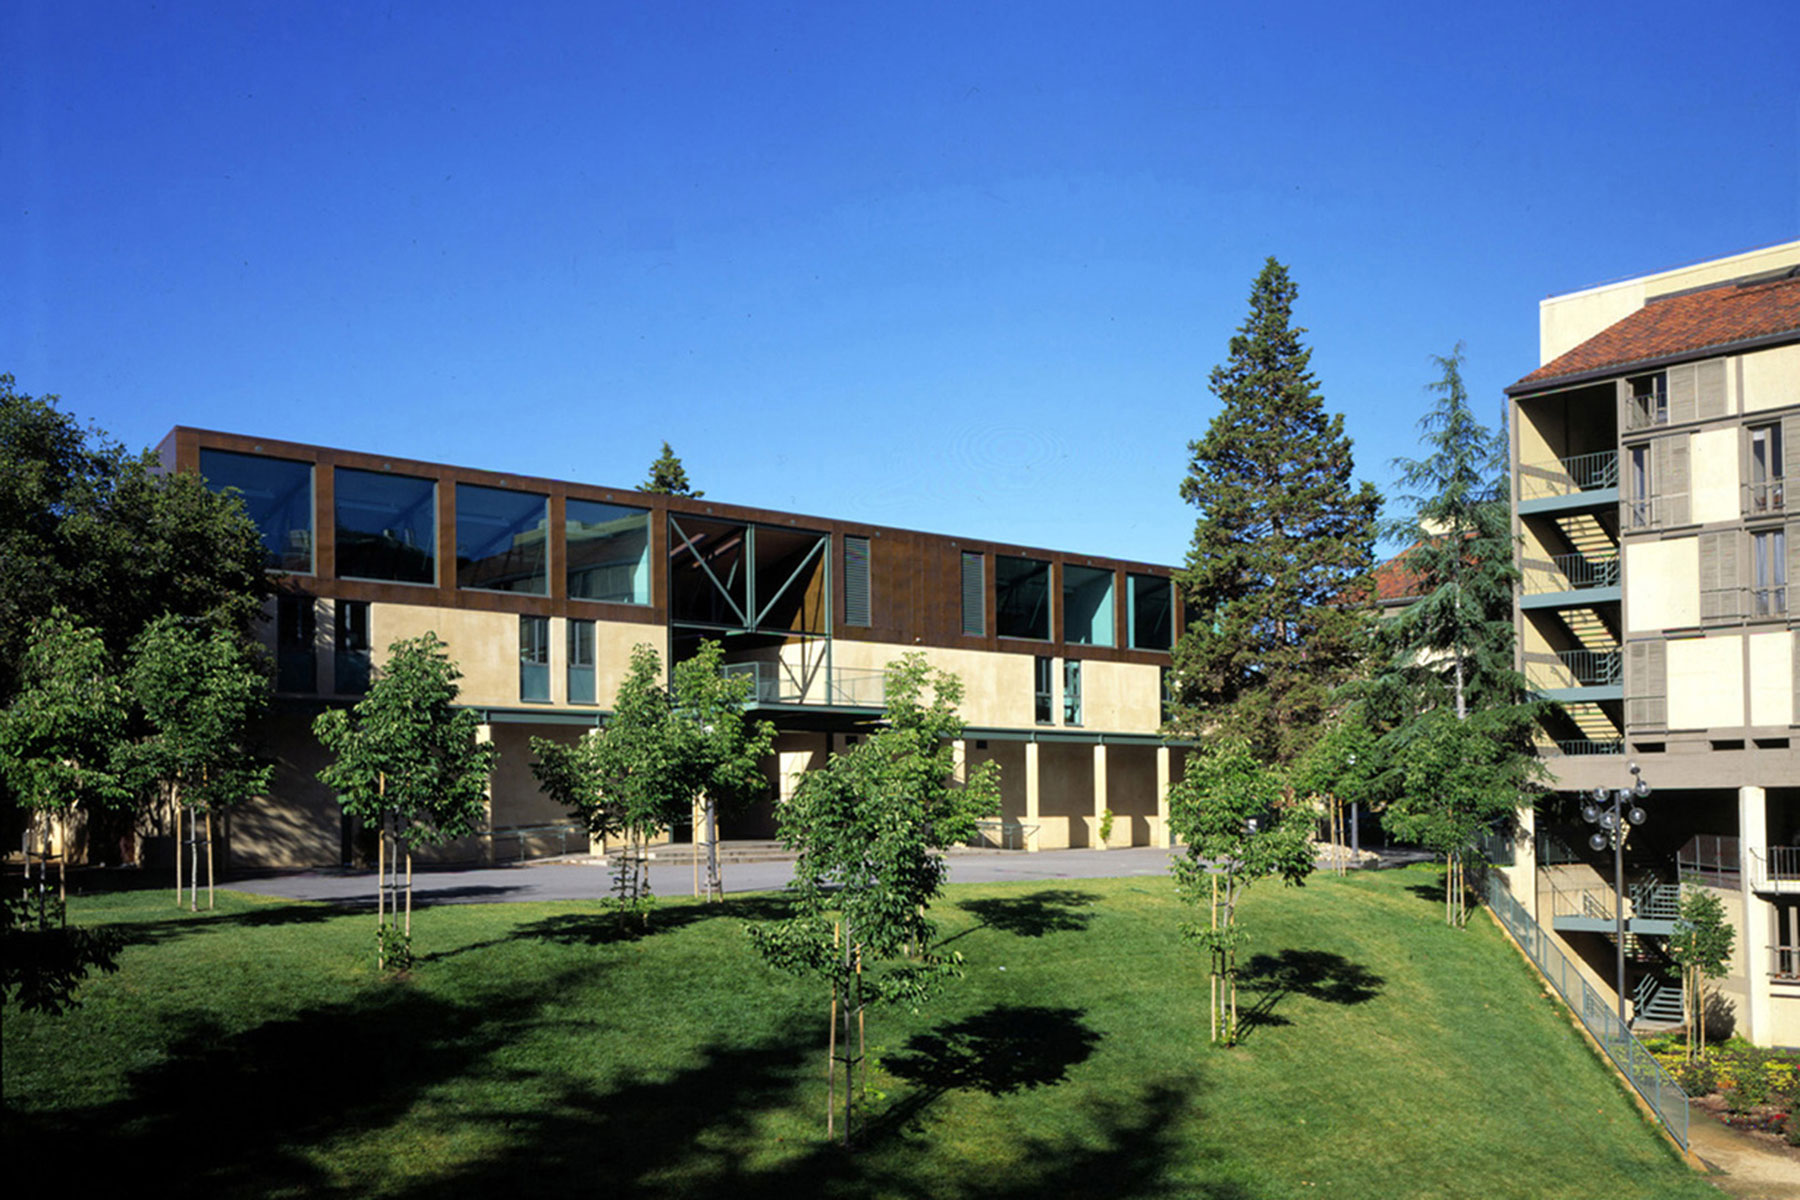 This annex building at the Stanford University campus in the Bay Area houses a unique, interdisciplinary product development program for the Business and Engineering schools.